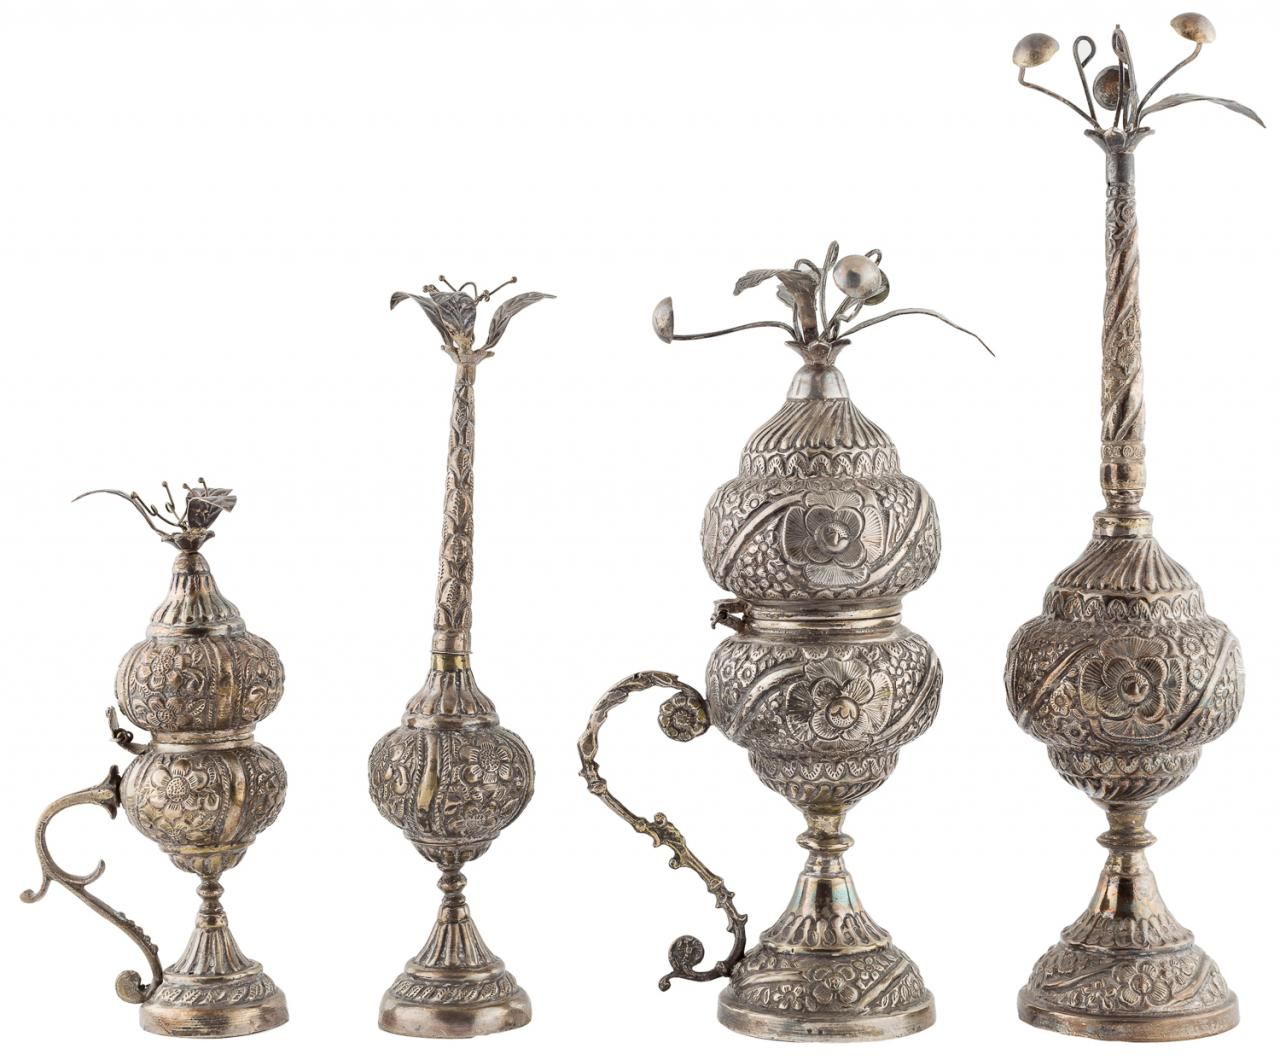 Null Four silver objects with chiseled decoration of floral and vegetal motifs

&hellip;